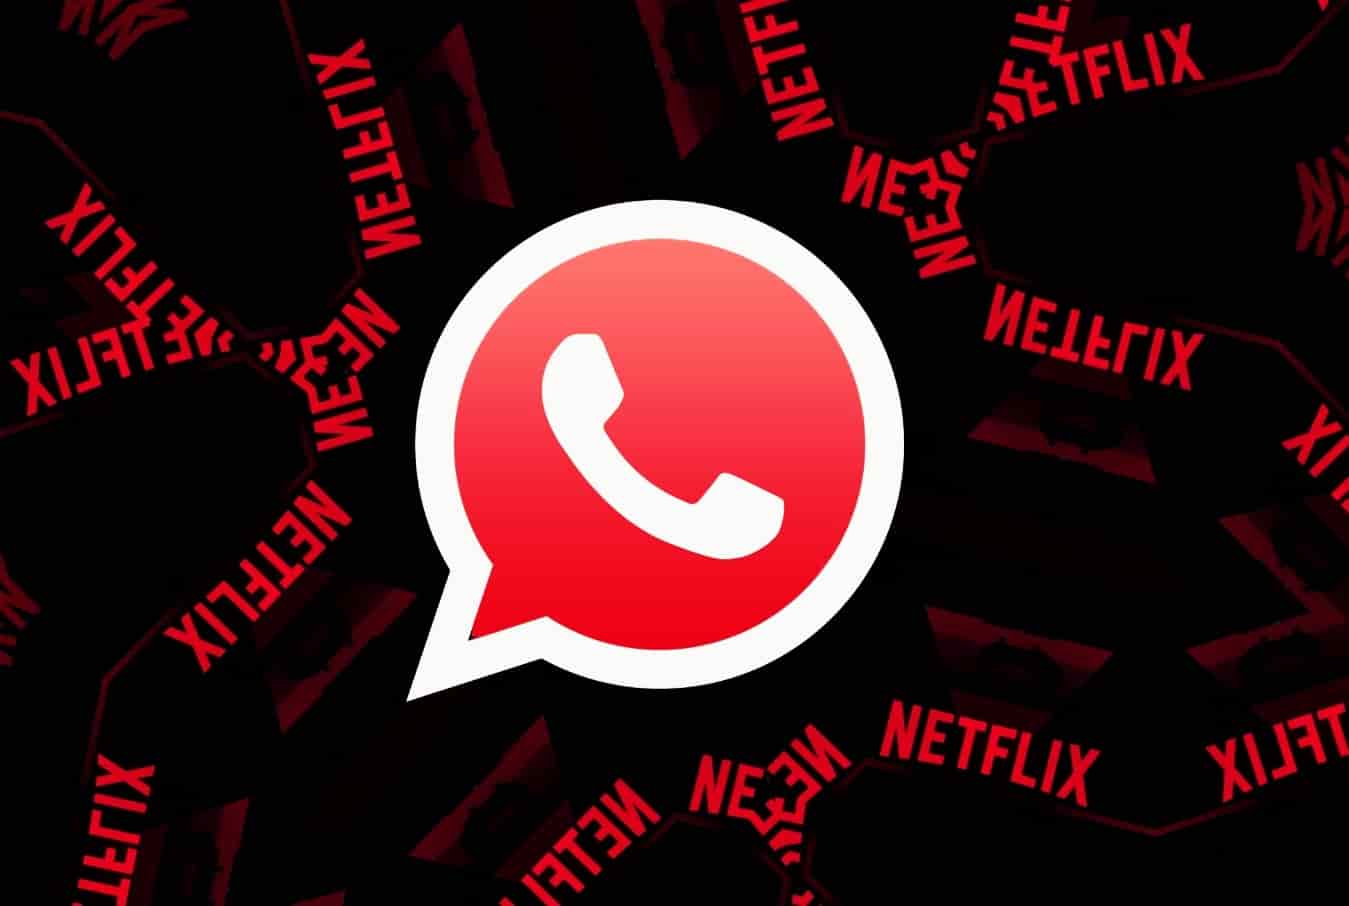 Fake Netflix app on Play Store caught hijacking WhatsApp sessions